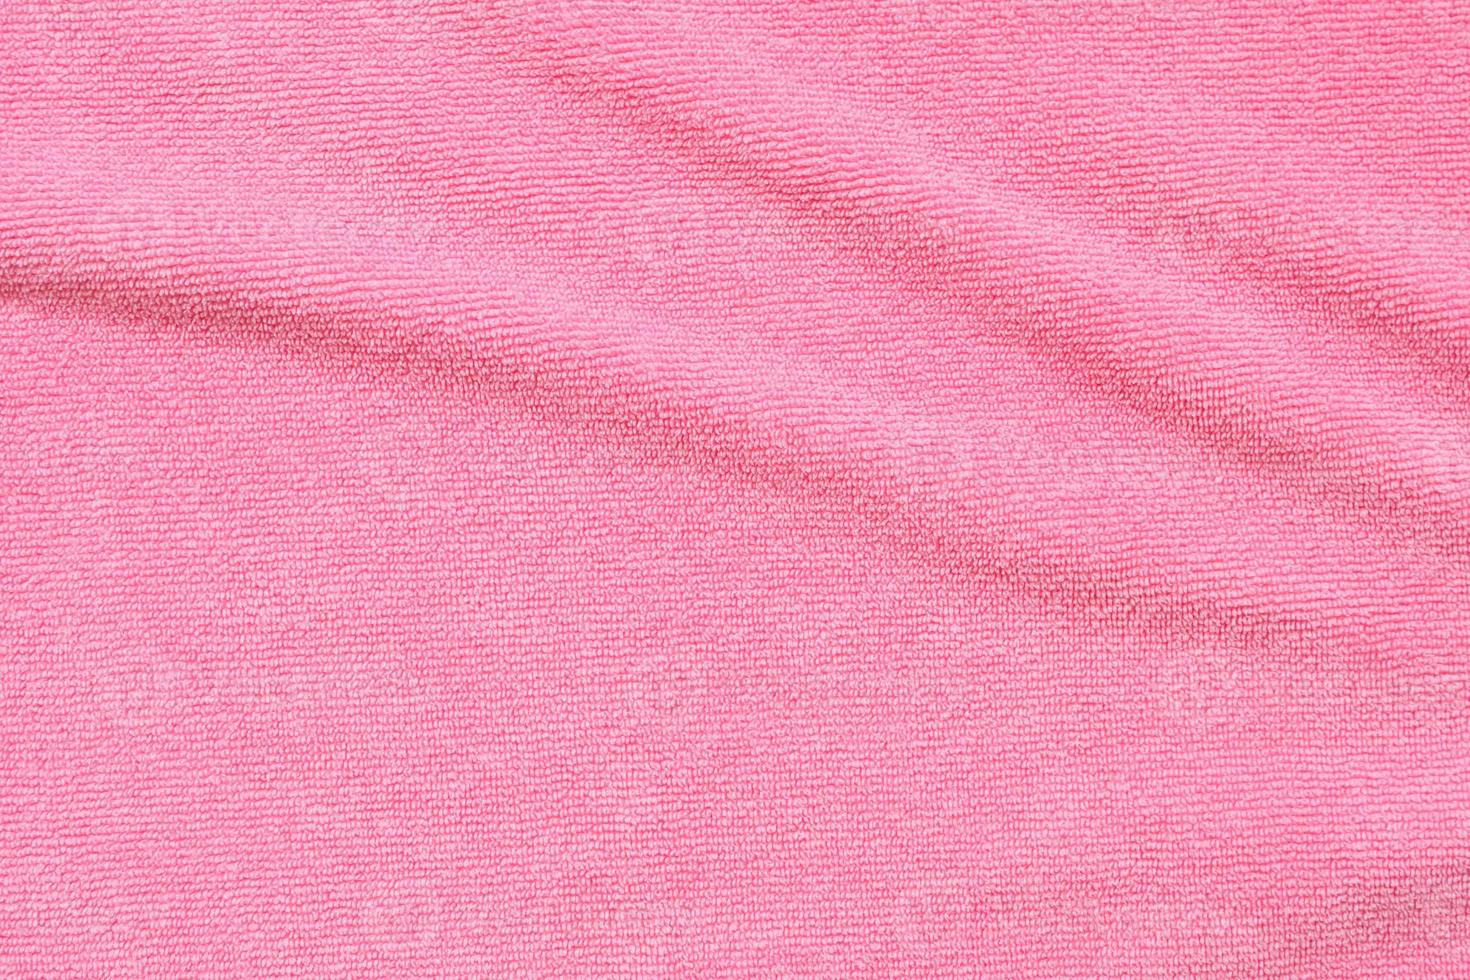 Pink towel fabric texture surface close up background 12885004 Stock ...